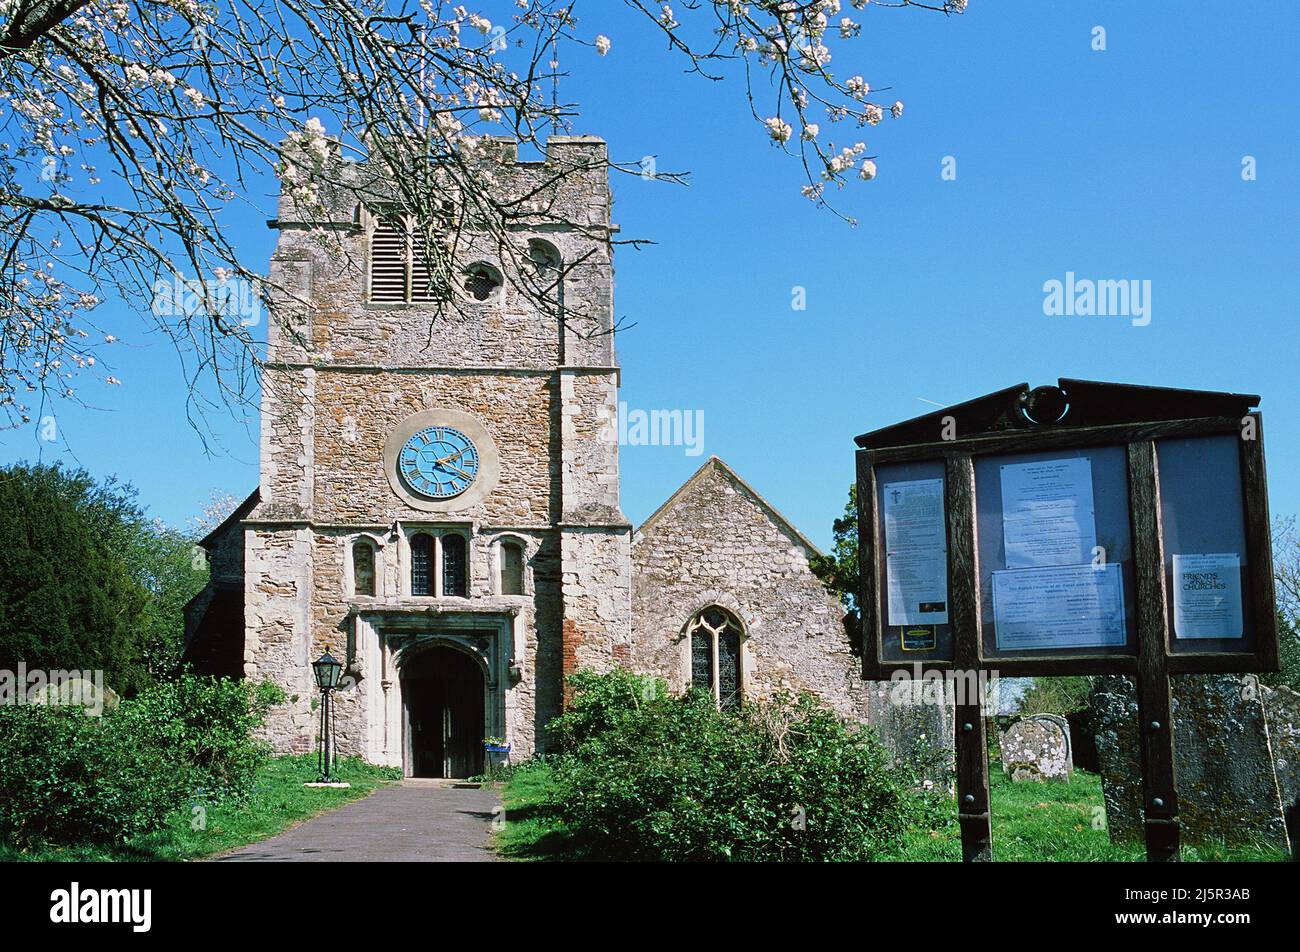 The exterior of the ancient church of St Peter and St Paul at Appledore, Kent, South East England Stock Photo